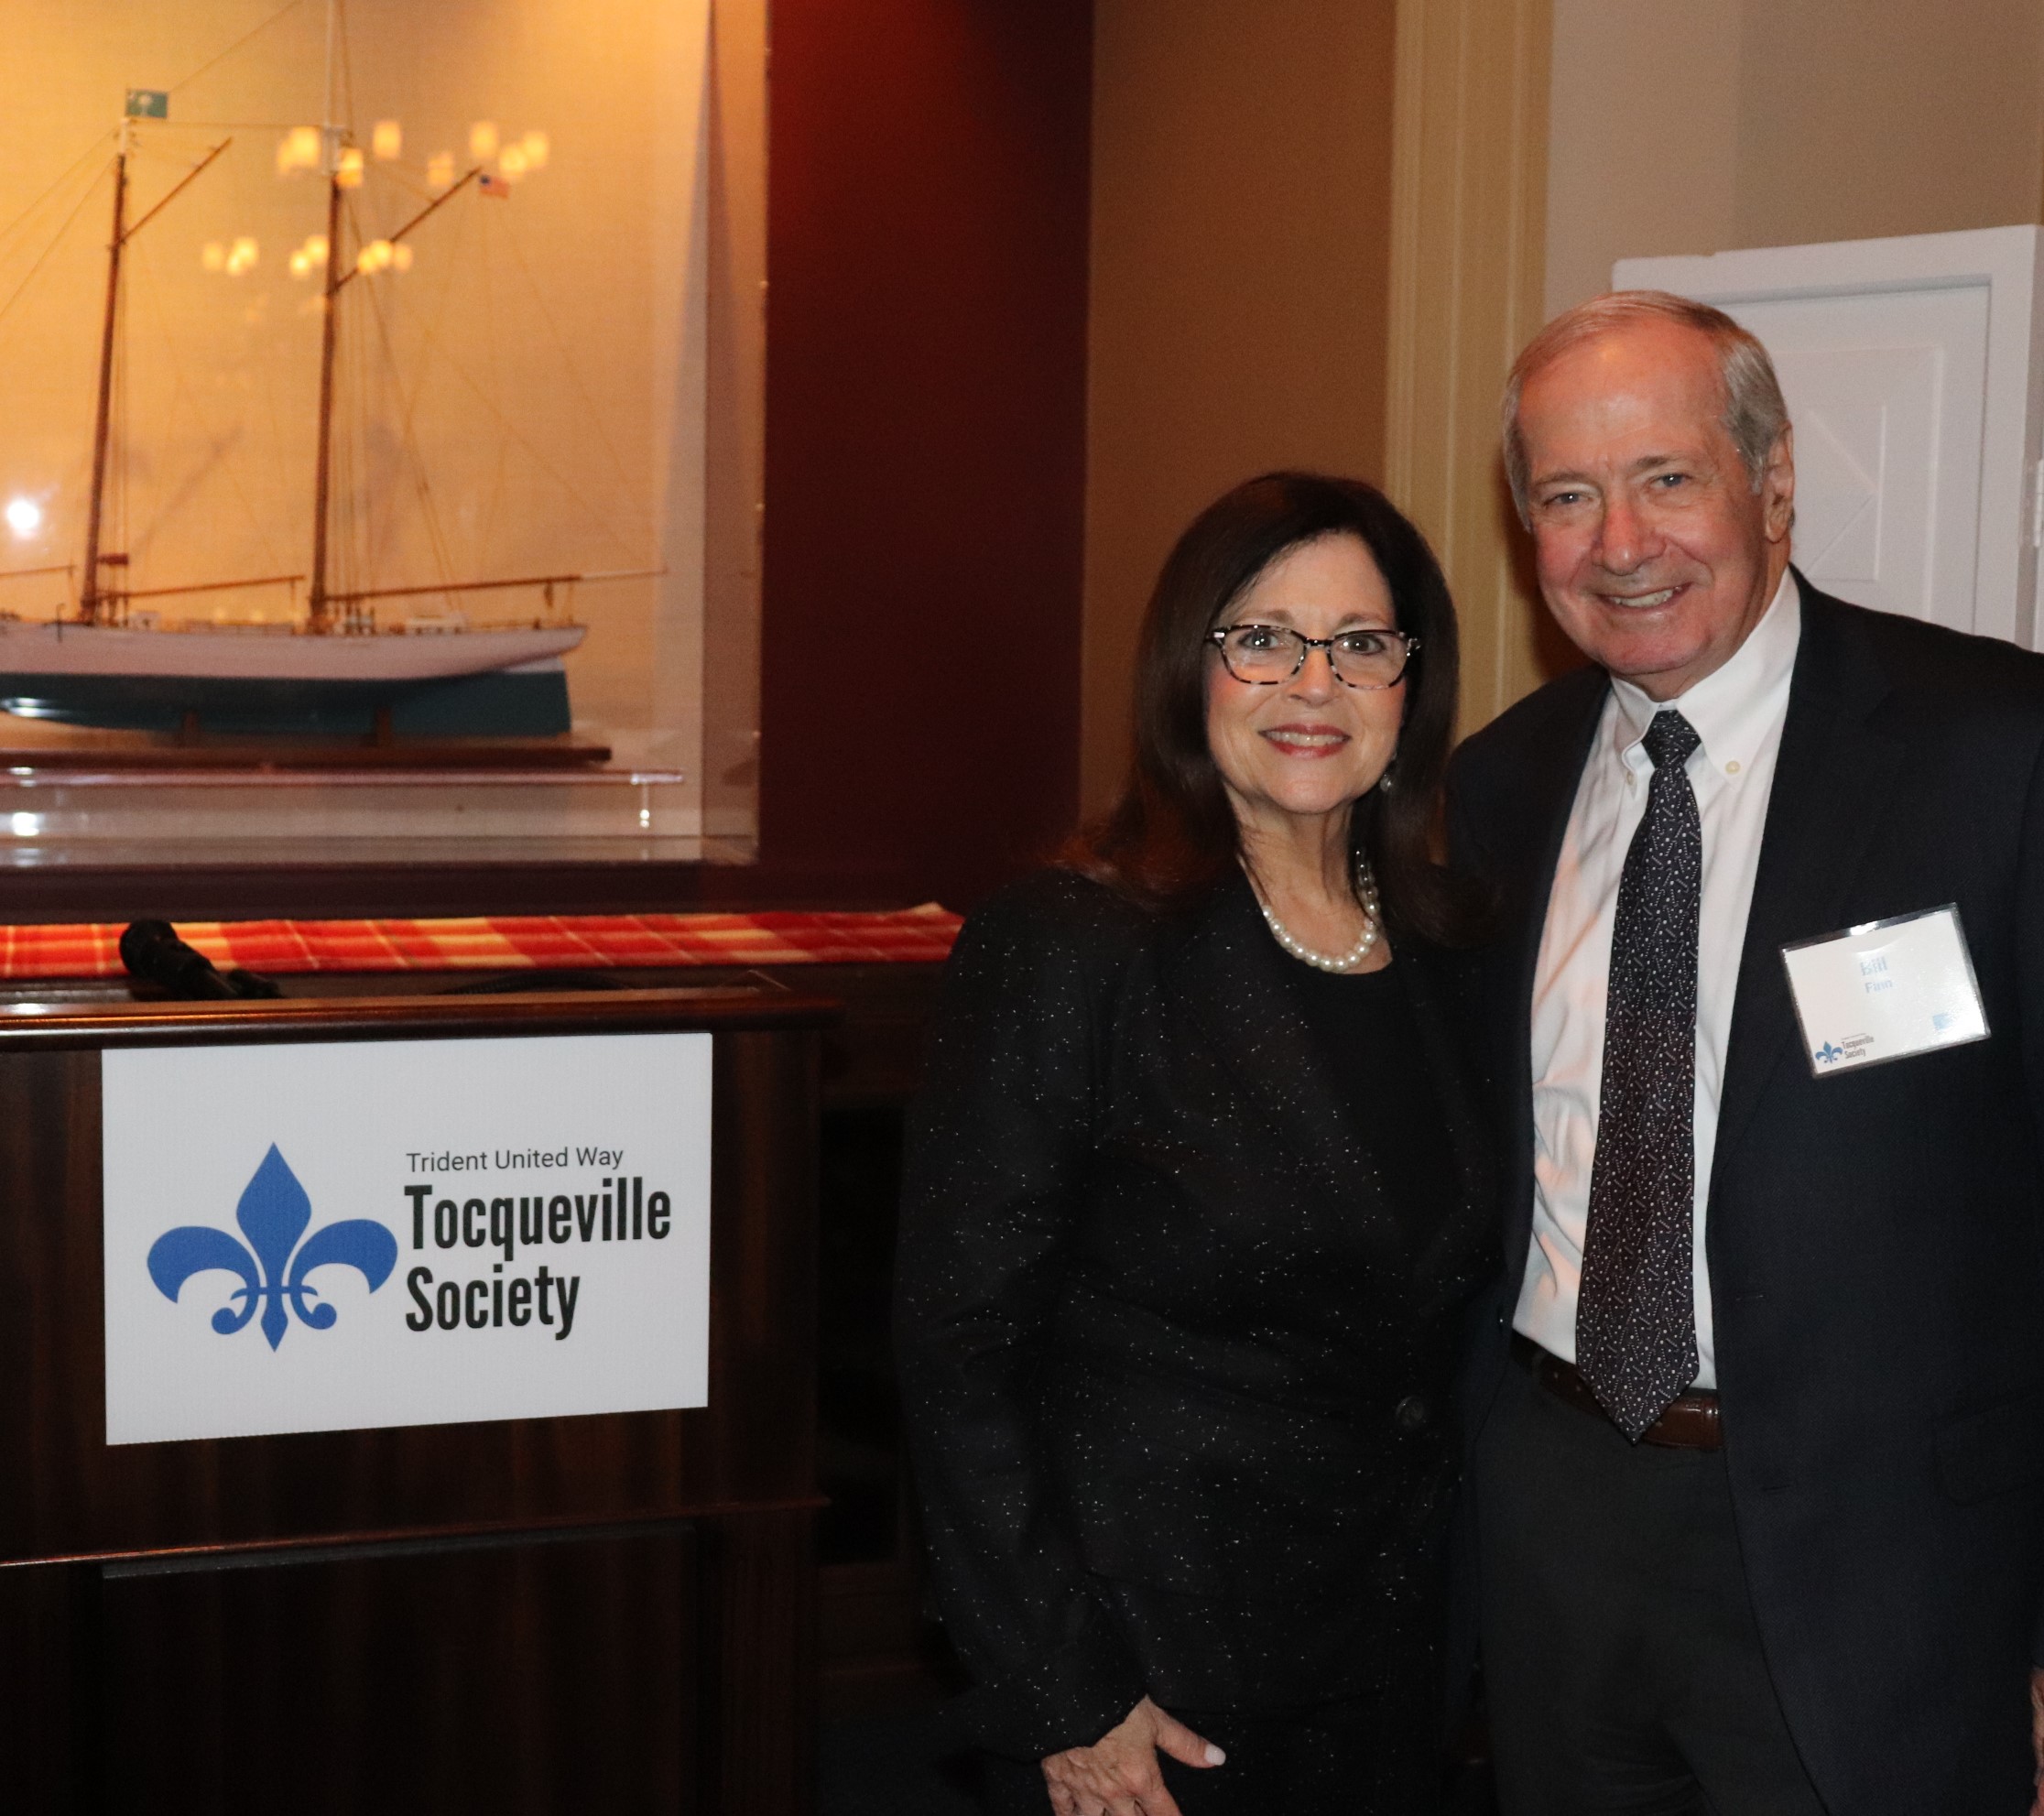 "On the left, a model ship rests on a table behind a window, behind another table with a sign reading "Trident United Way Tocqueville Society. On the right, co-chairs Anita Zucker and Bill Finn stand and smile."